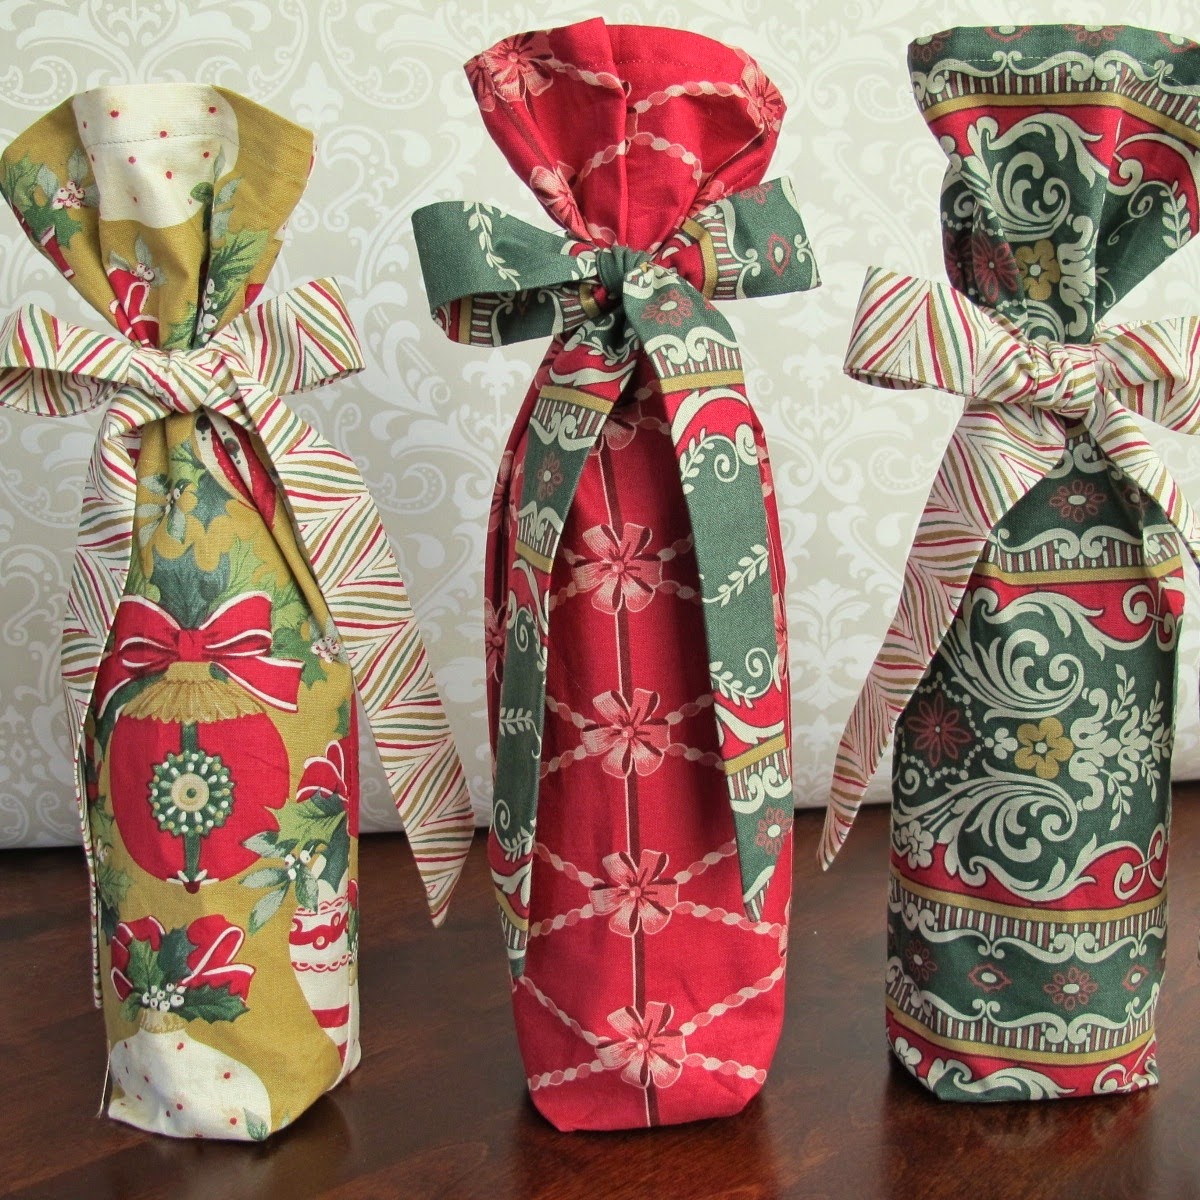 For more Christmas giving ideas, check out the Fabric Gift Card Holder ...